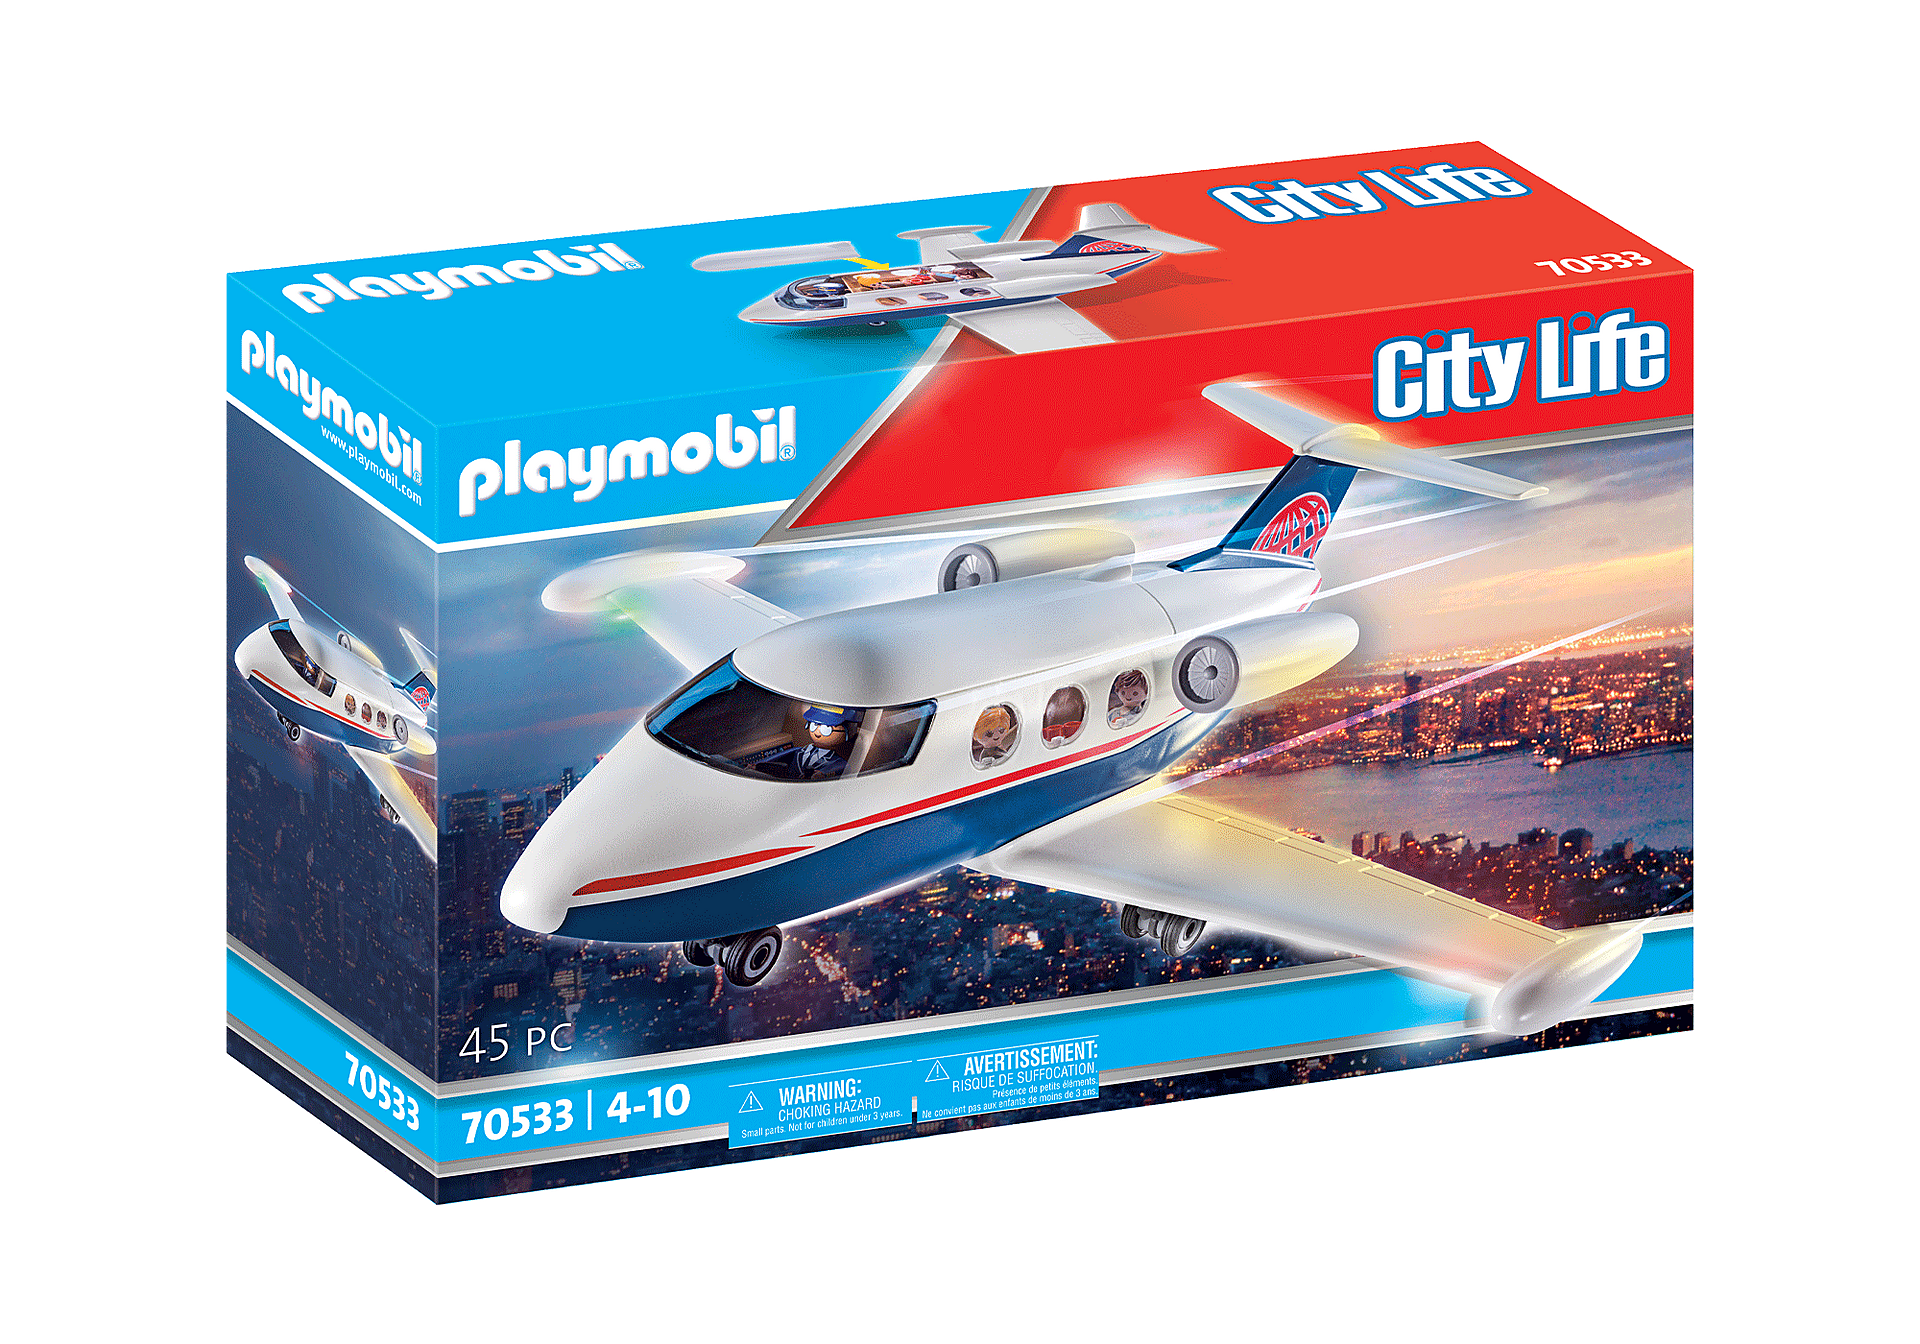 Private Jet by Playmobil #70533